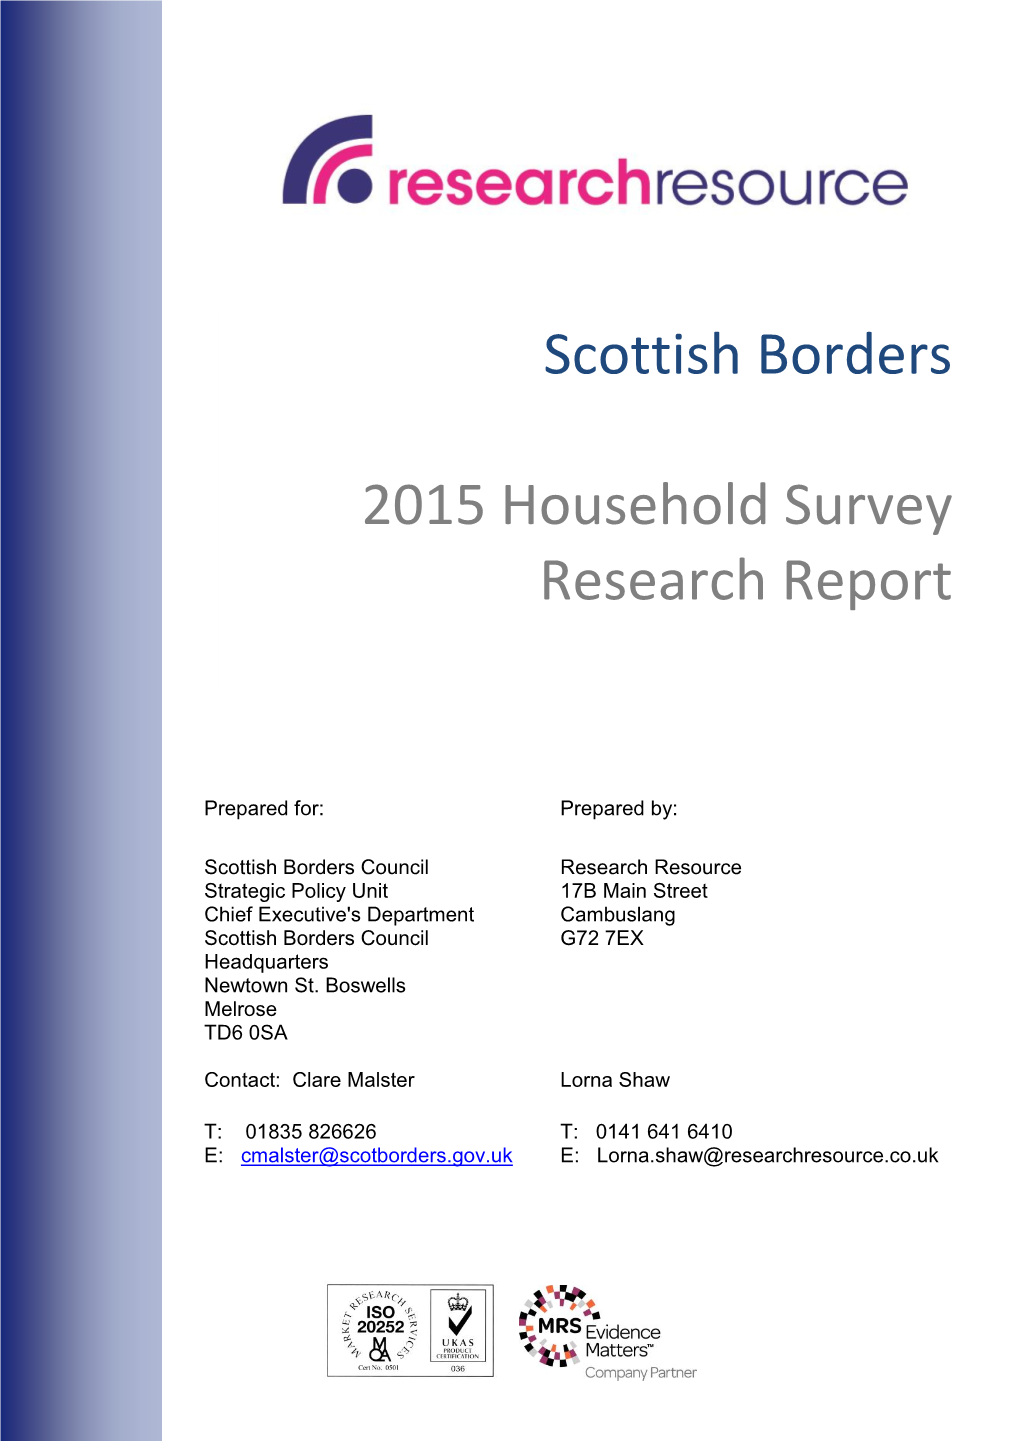 Scottish Borders 2015 Household Survey Research Report